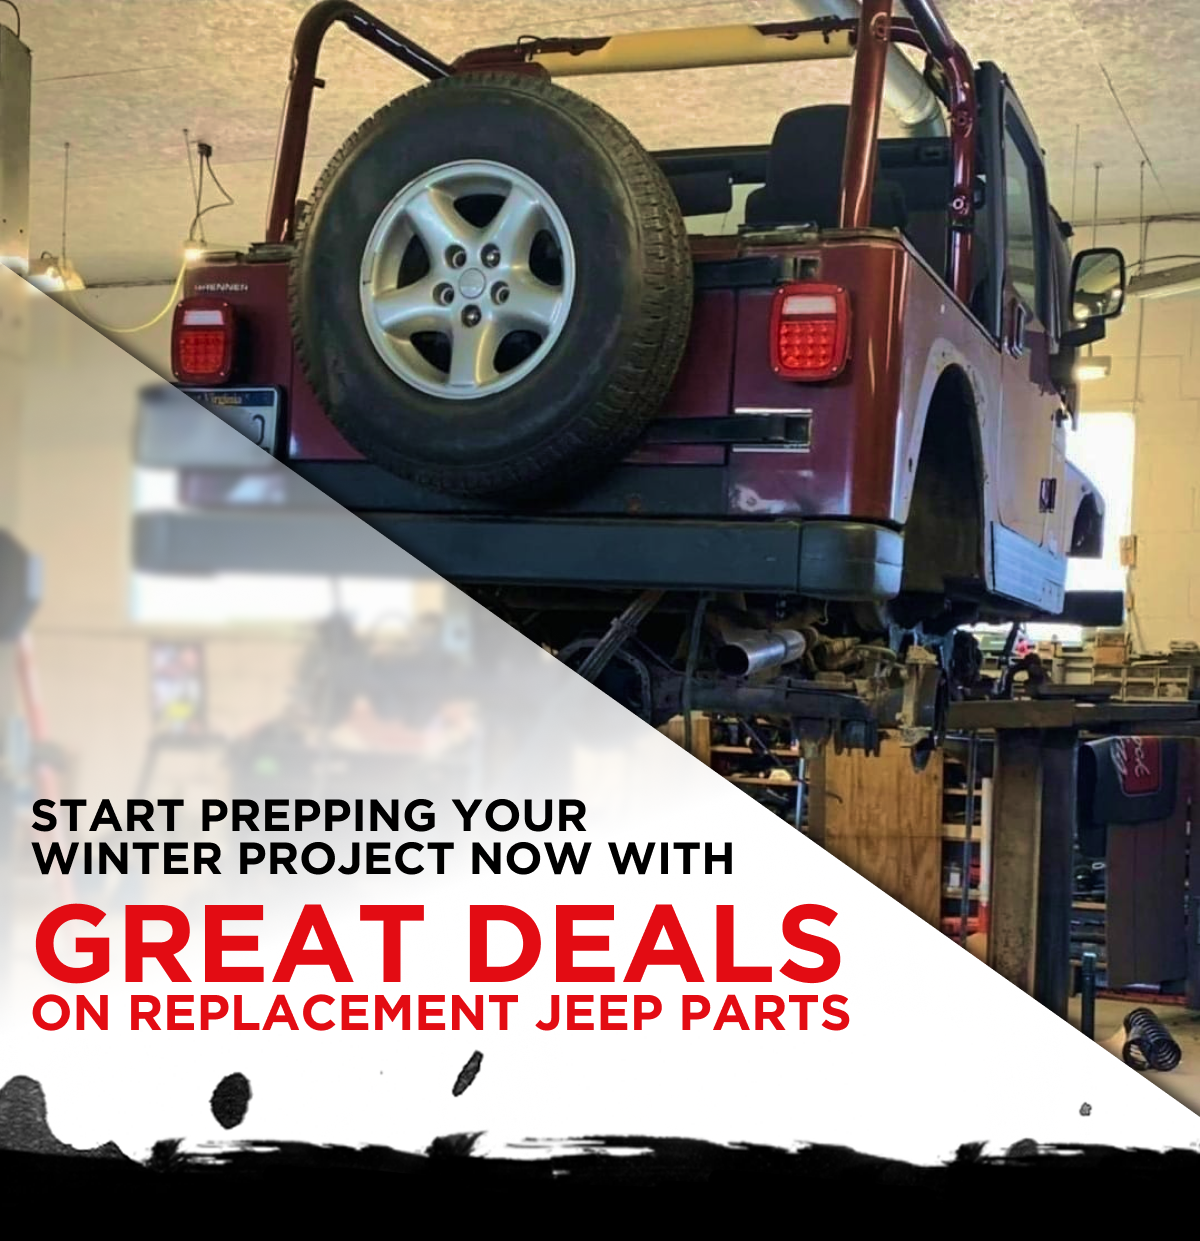 Start Prepping Your Winter Project Now with Great Deals On Replacement Jeep Parts